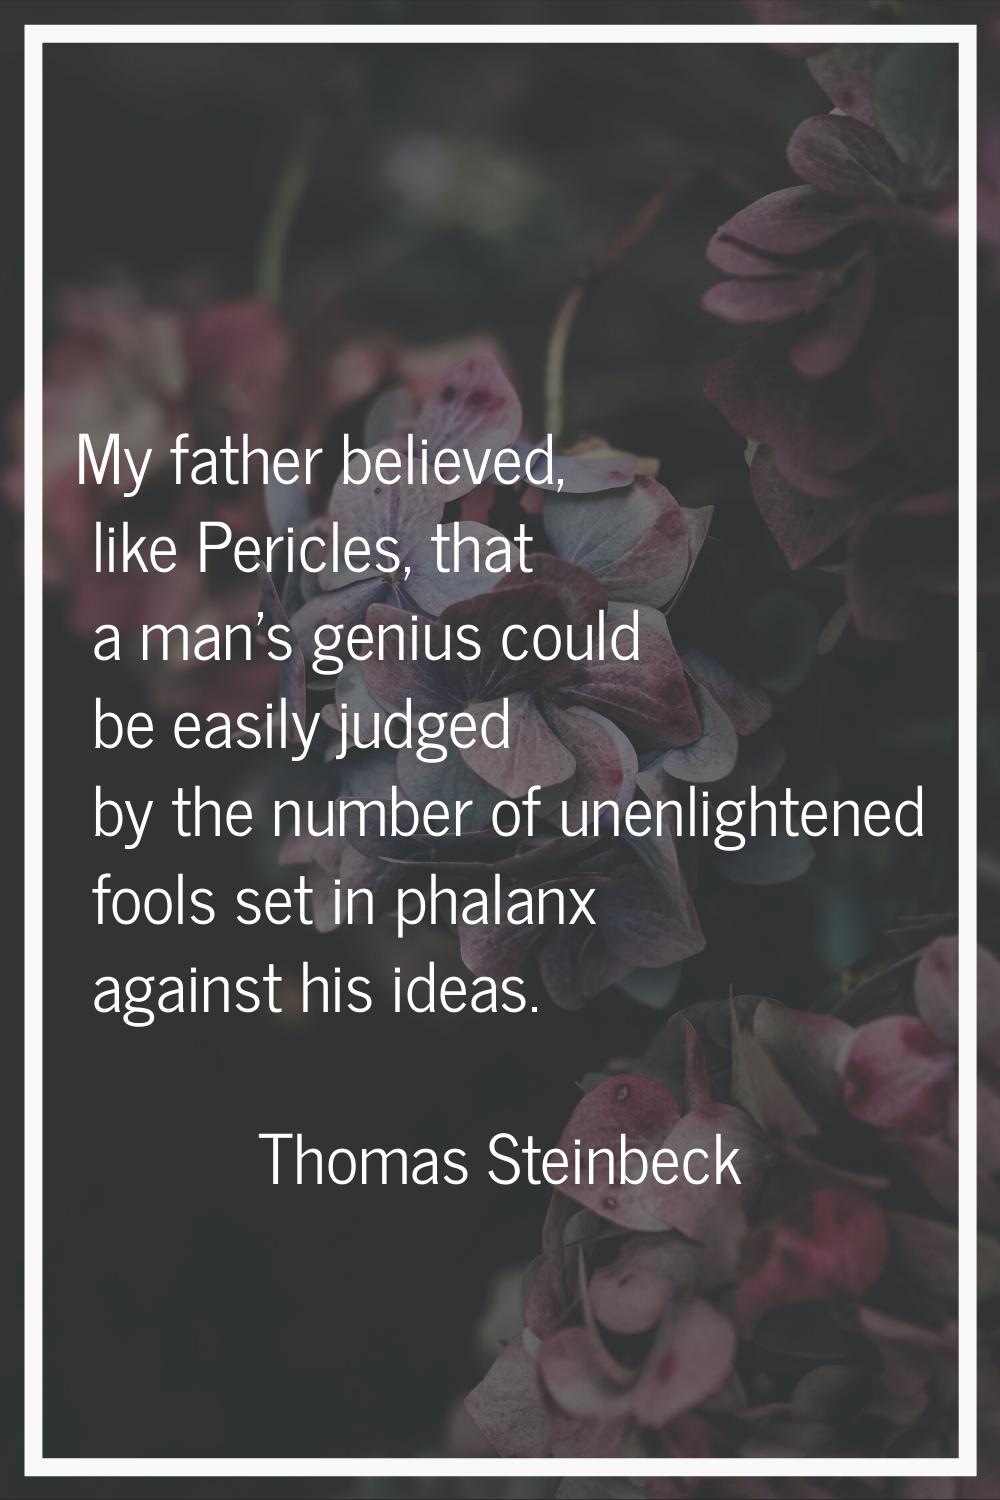 My father believed, like Pericles, that a man's genius could be easily judged by the number of unen